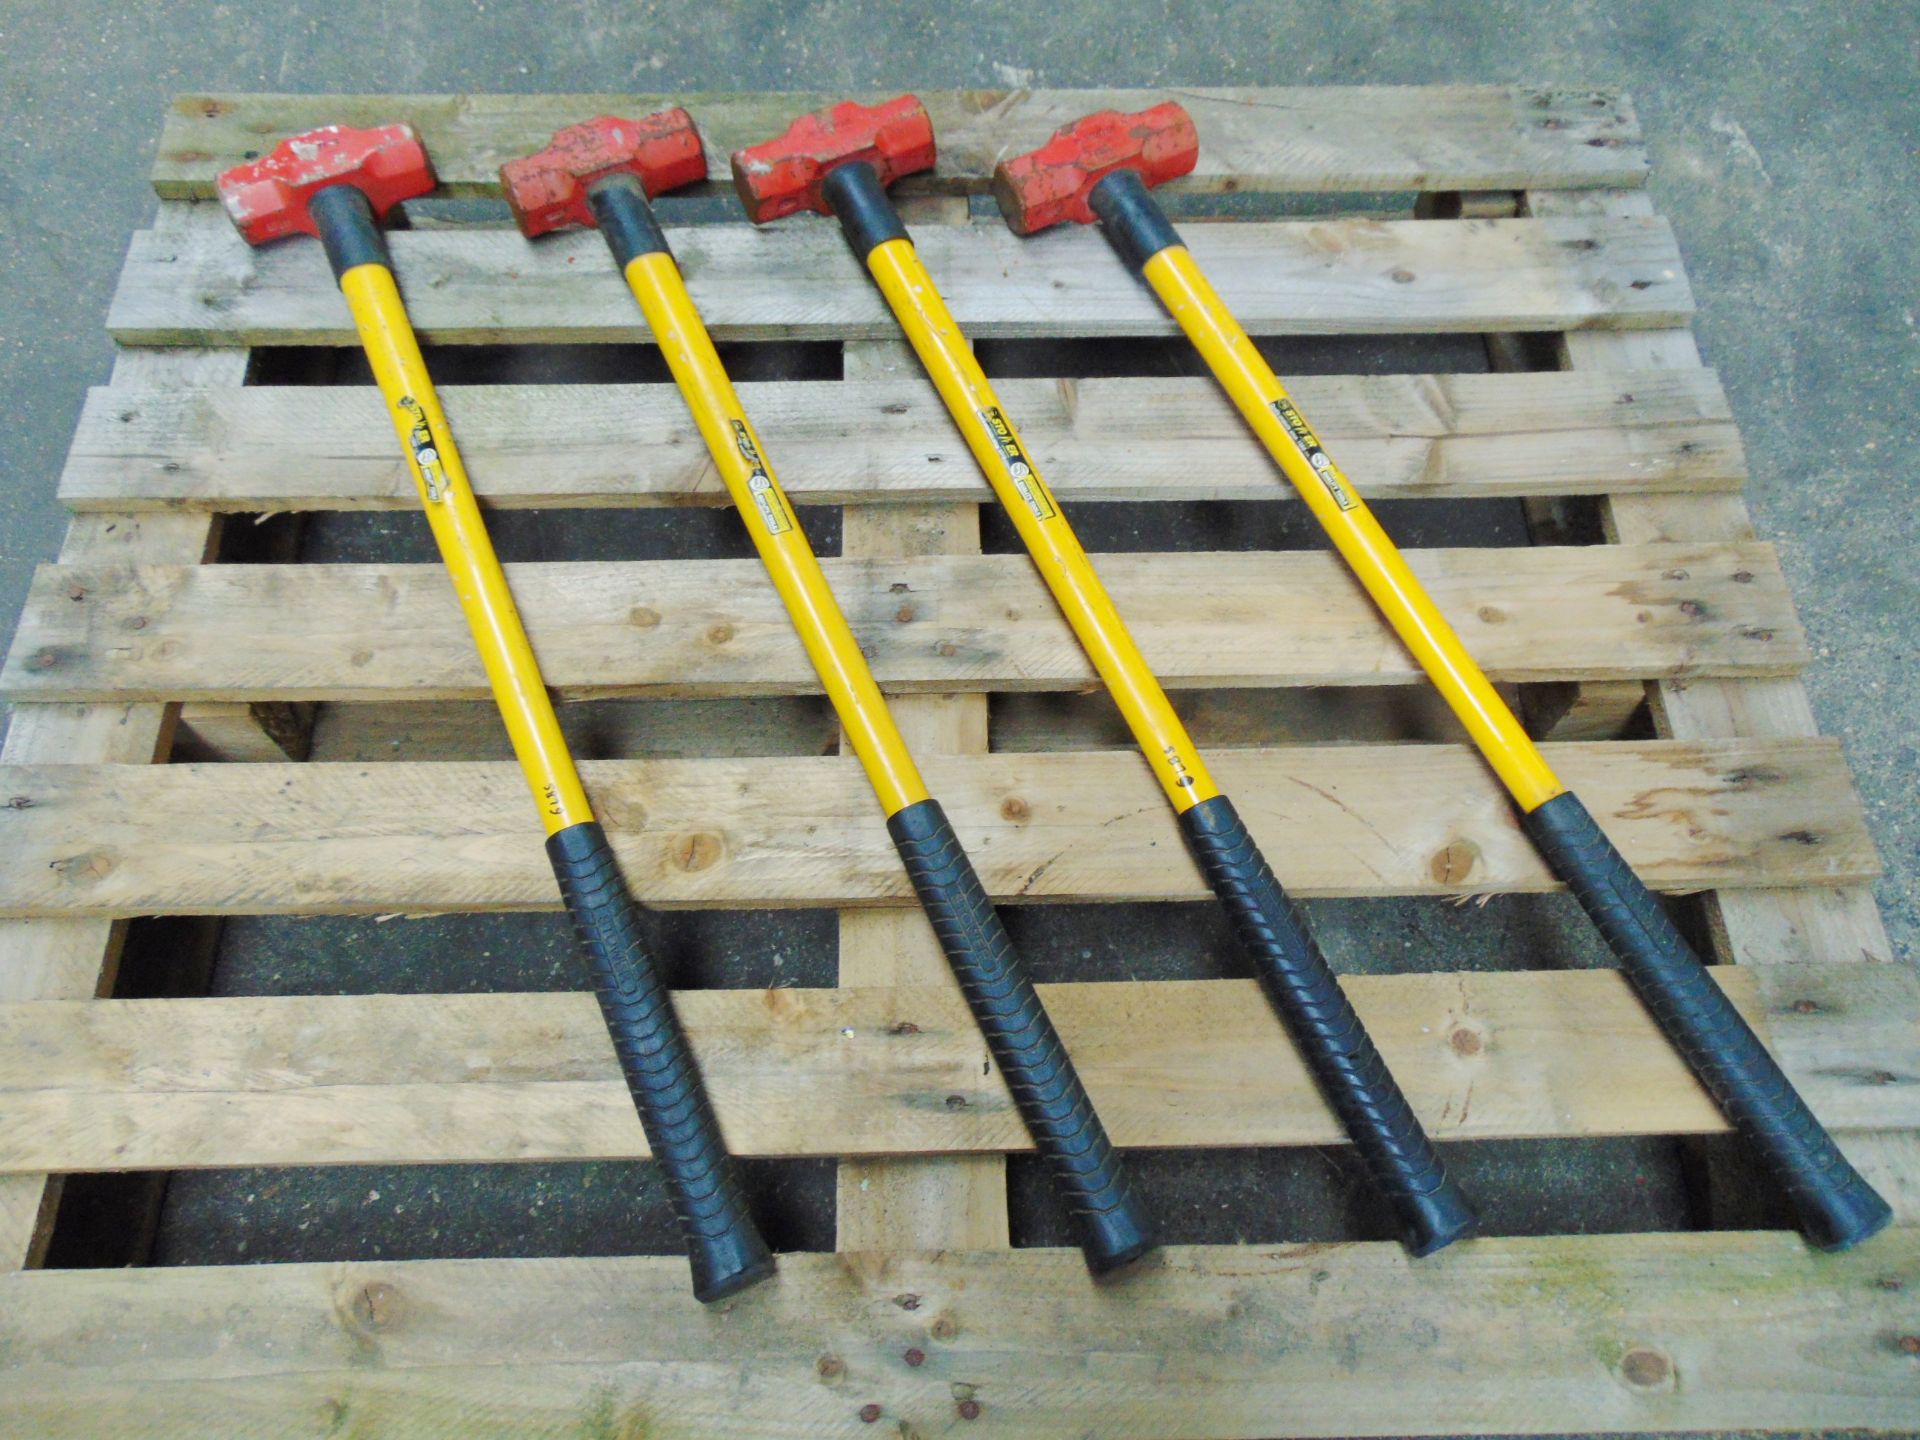 4 x Stower 6lb Sledge Hammers